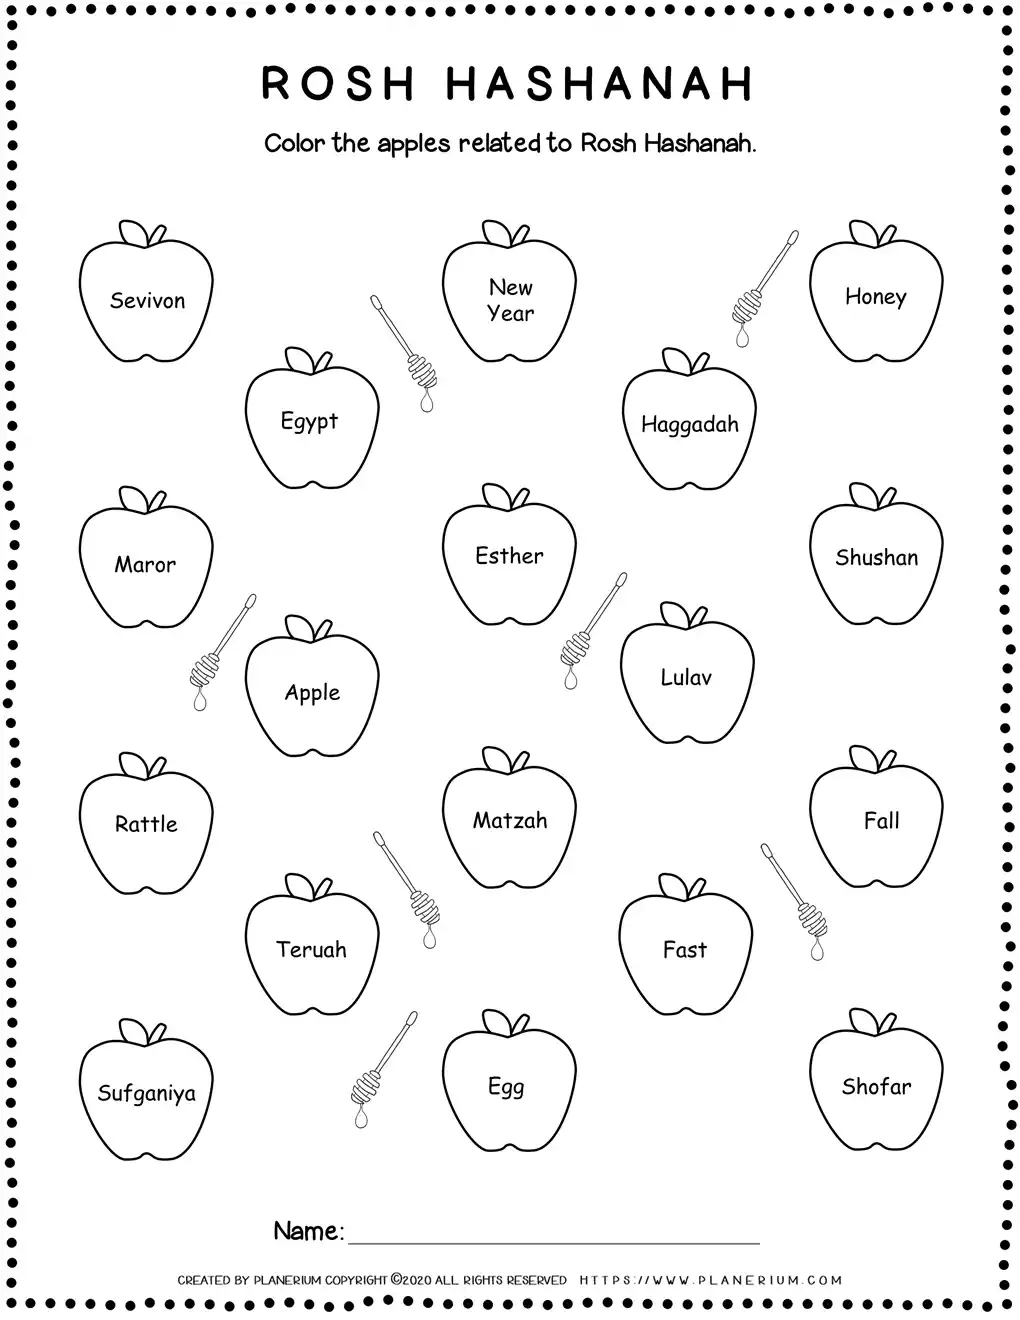 Rosh Hashanah - Worksheets - Color Related Words | Planerium